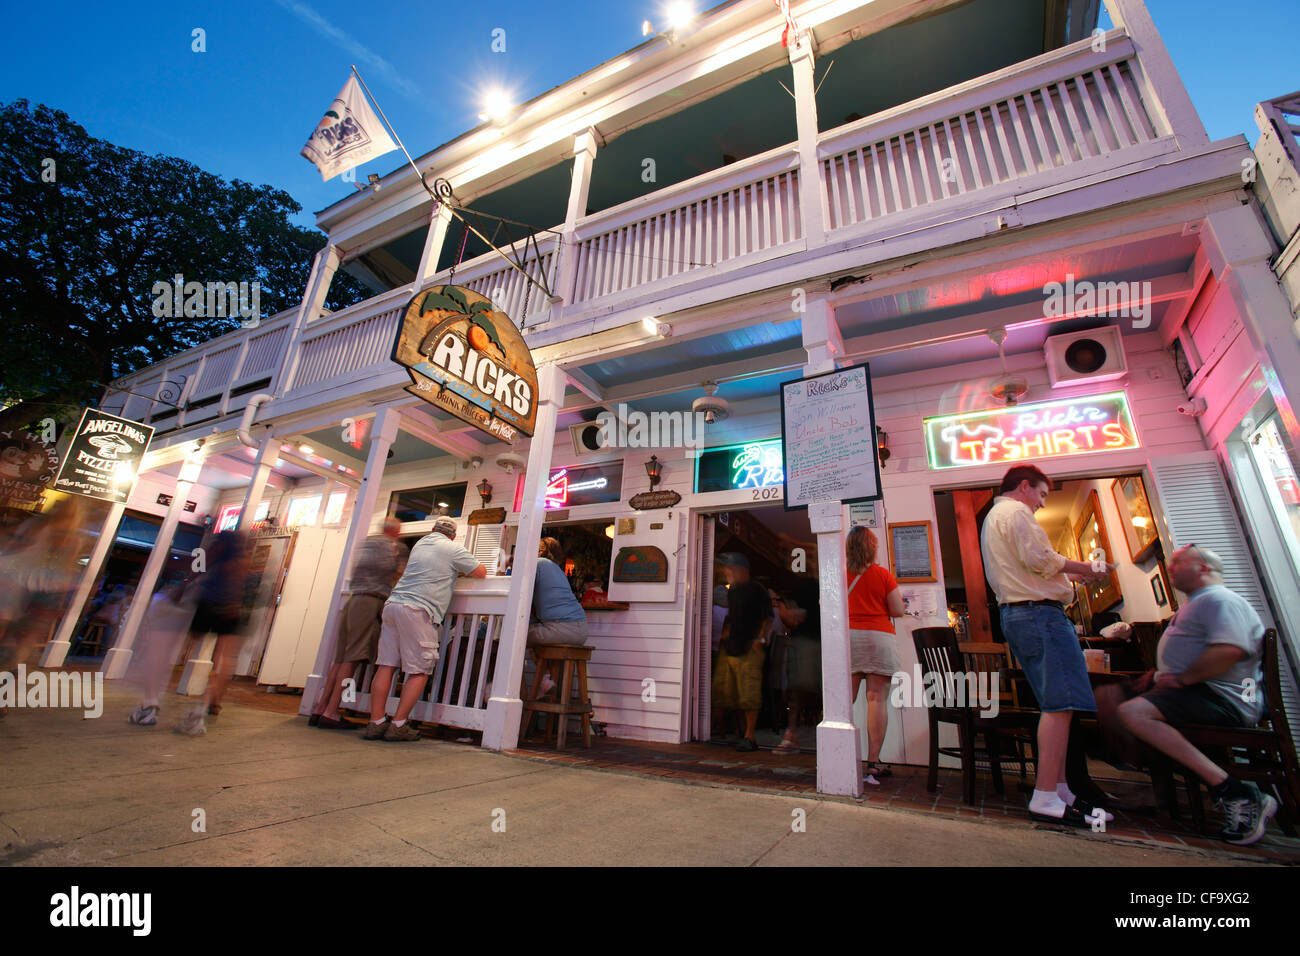 Street scene in front of Rick's bar on Duval Street, Key West, Florida Stock Photo